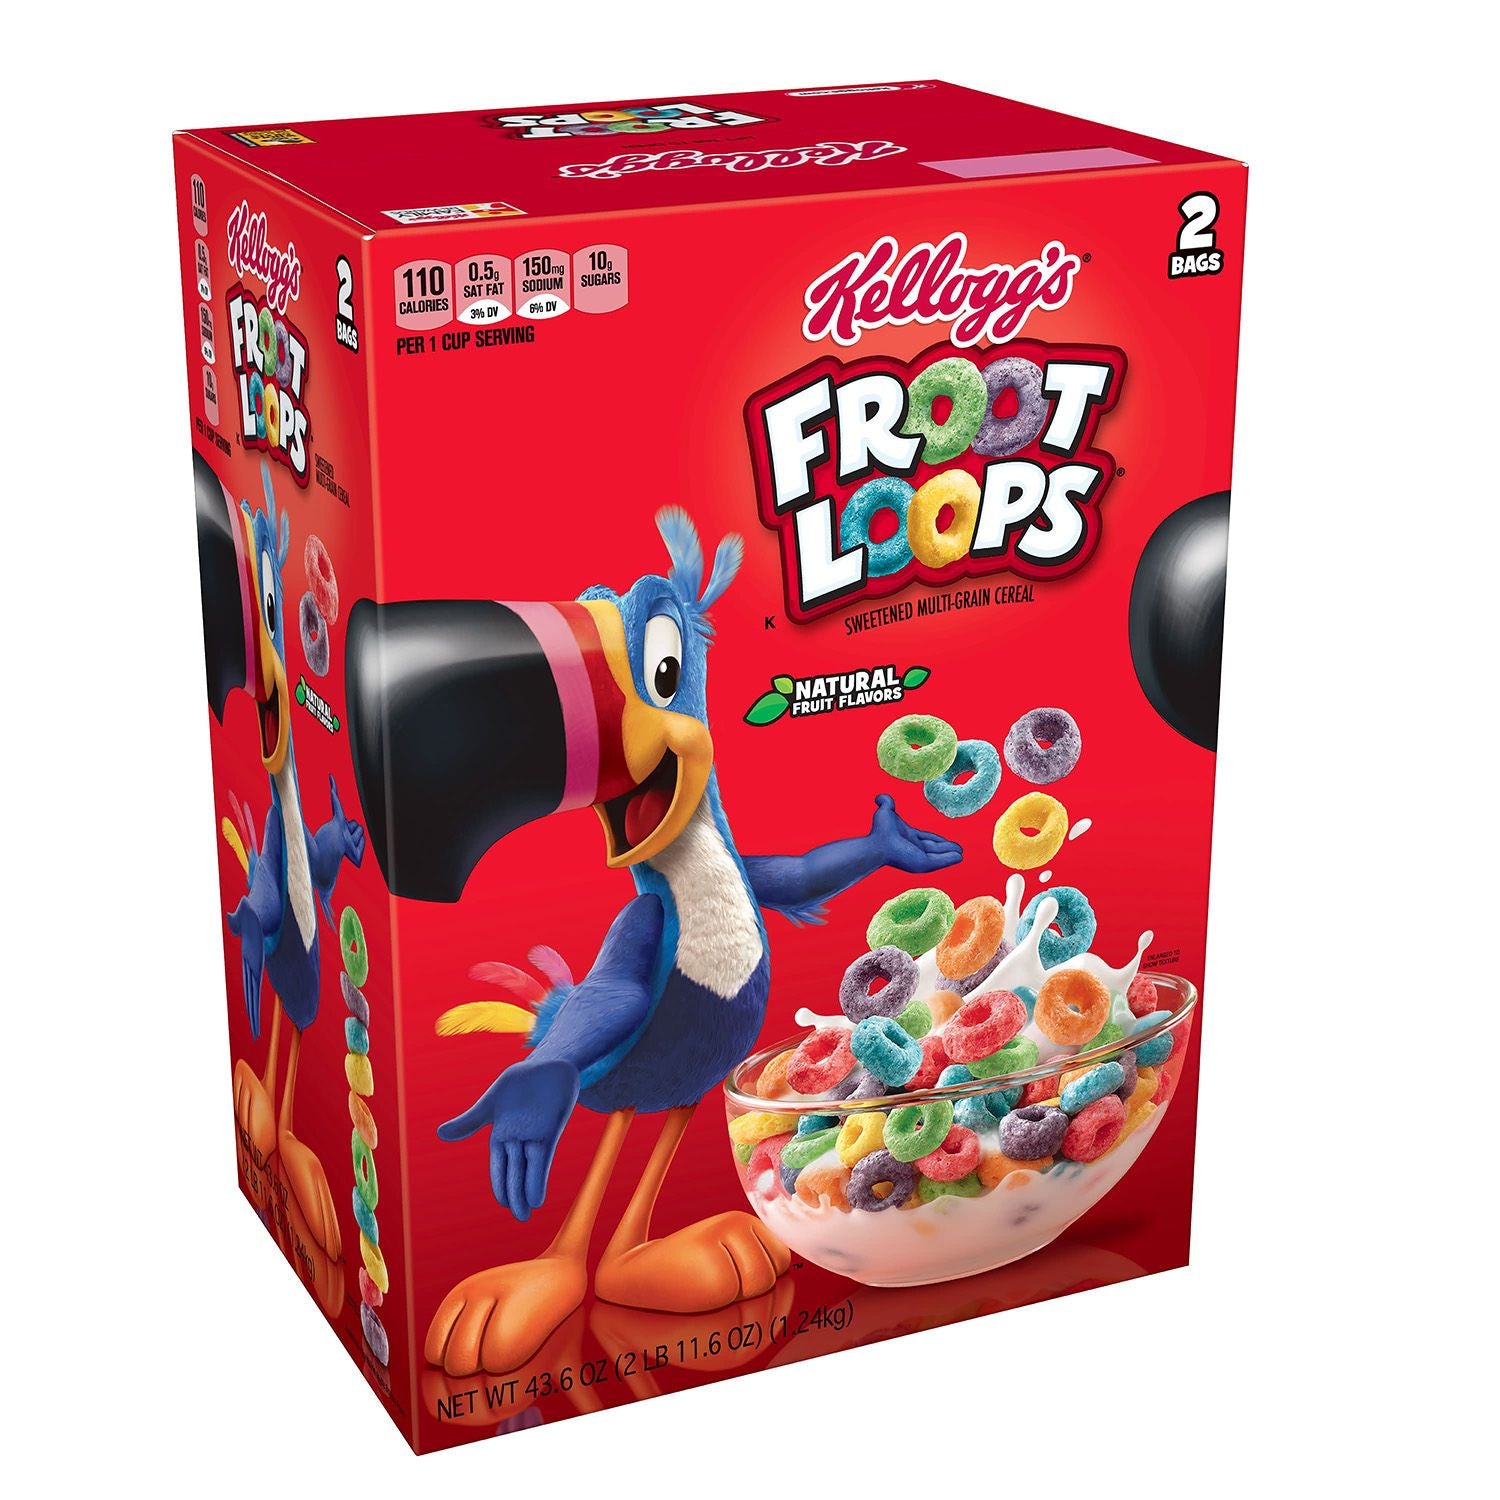 Froot Loops Multigrain Cereal, with Marshmallows, Sweetened